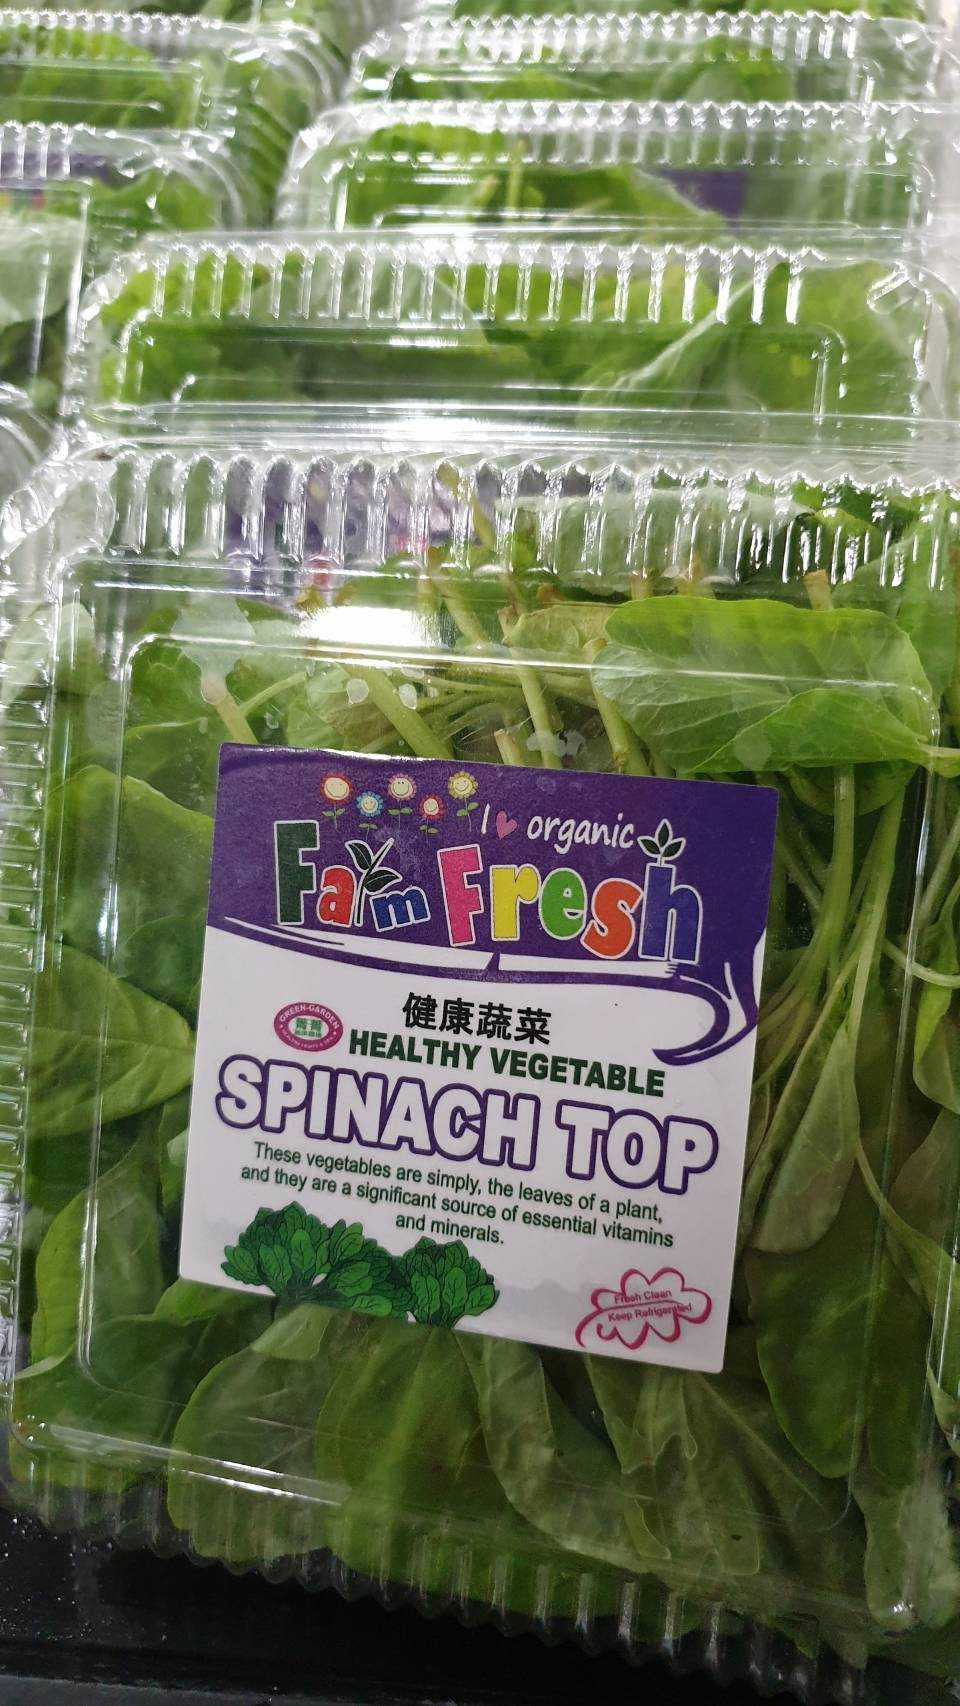 Fresh Vegetable Taiwan Spinach Tops "SBMA ONLY"